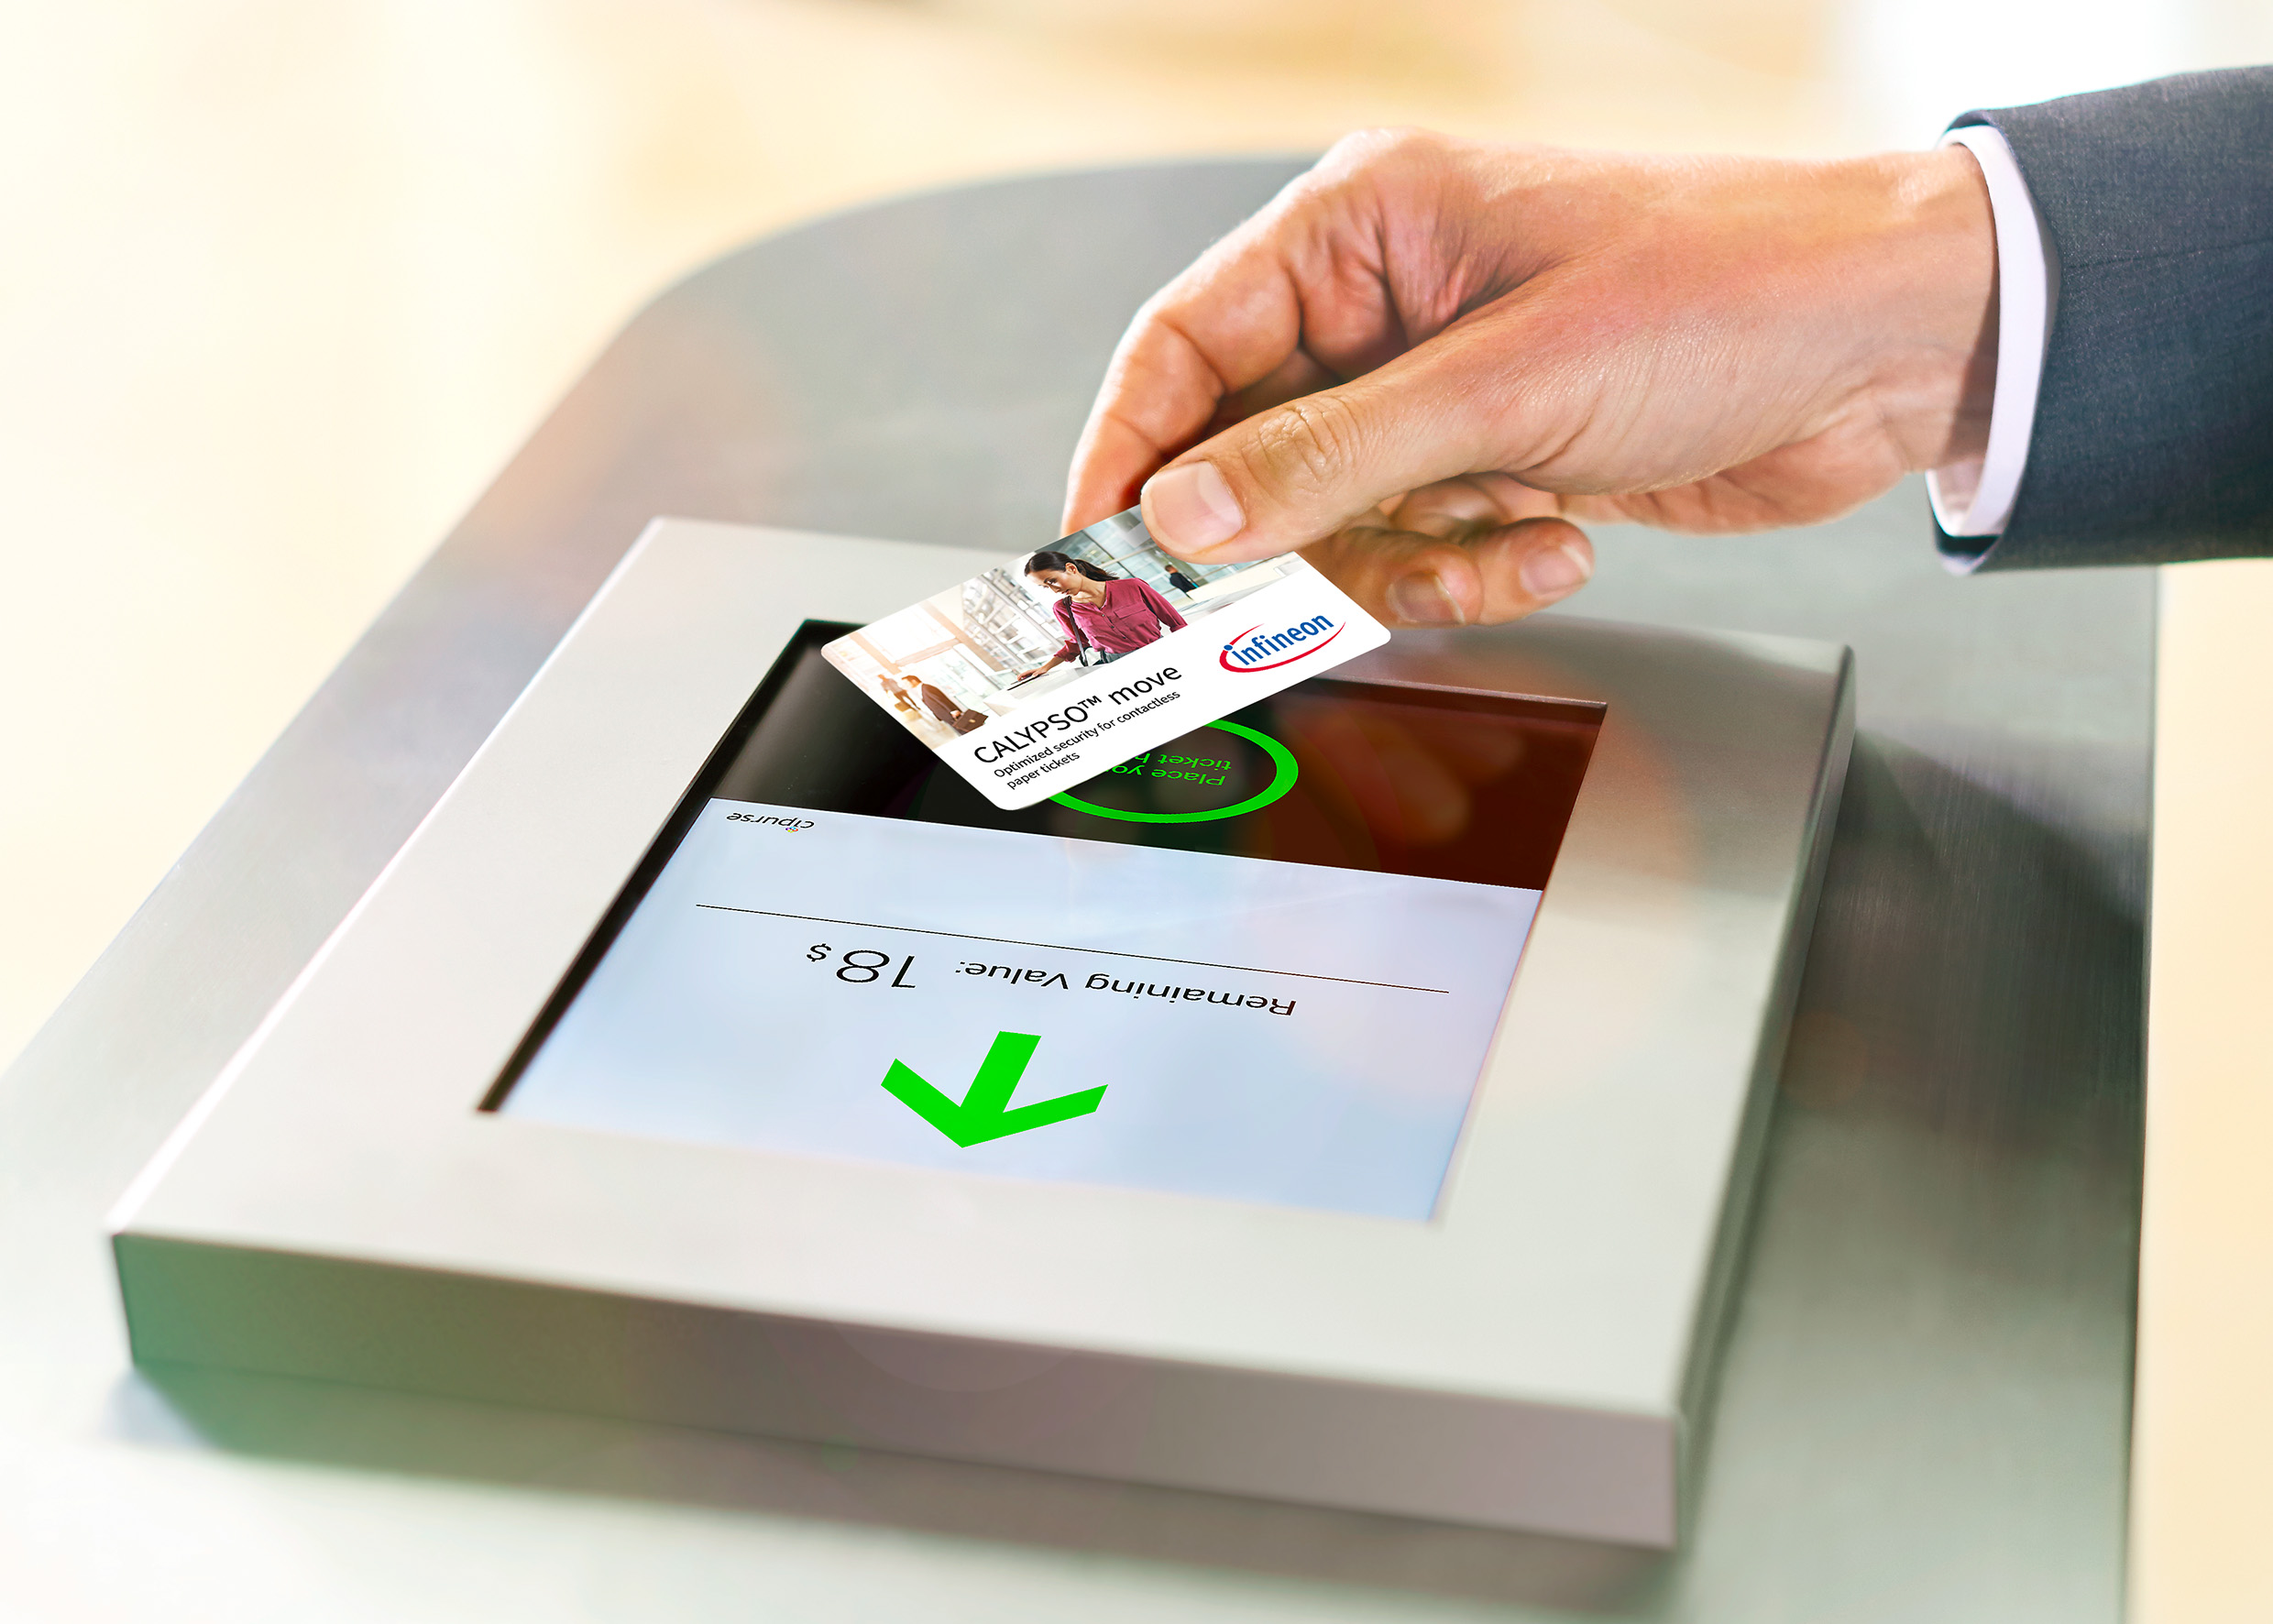 Infineon's CALYPSO Move Enables Easily Interoperable Ticketing Solutions Based on Open Standards